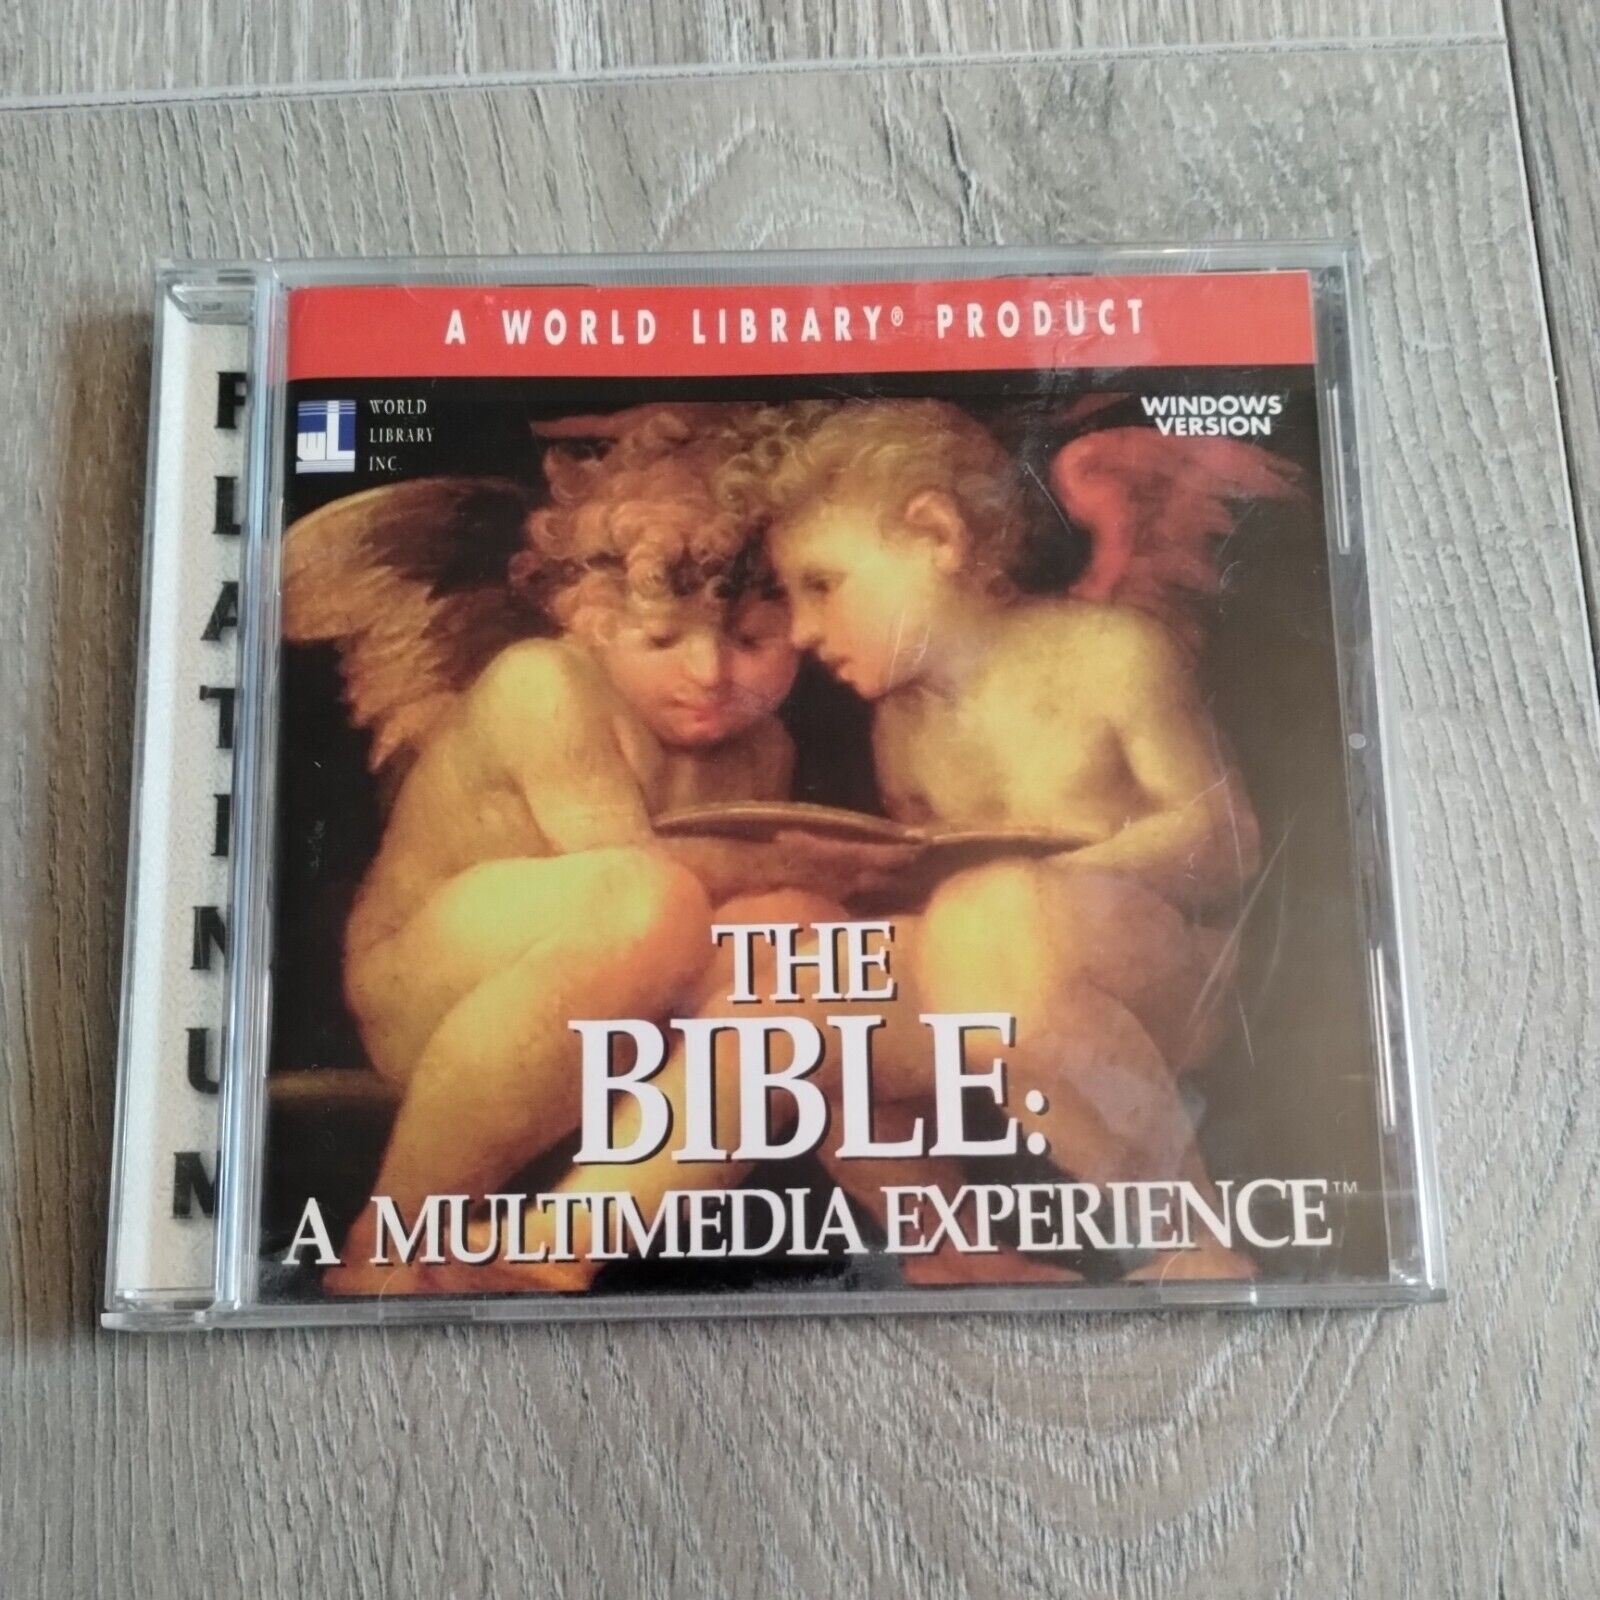 NEW The Bible A Multimedia Experience PC CD-Rom For Win 3.1/95.98